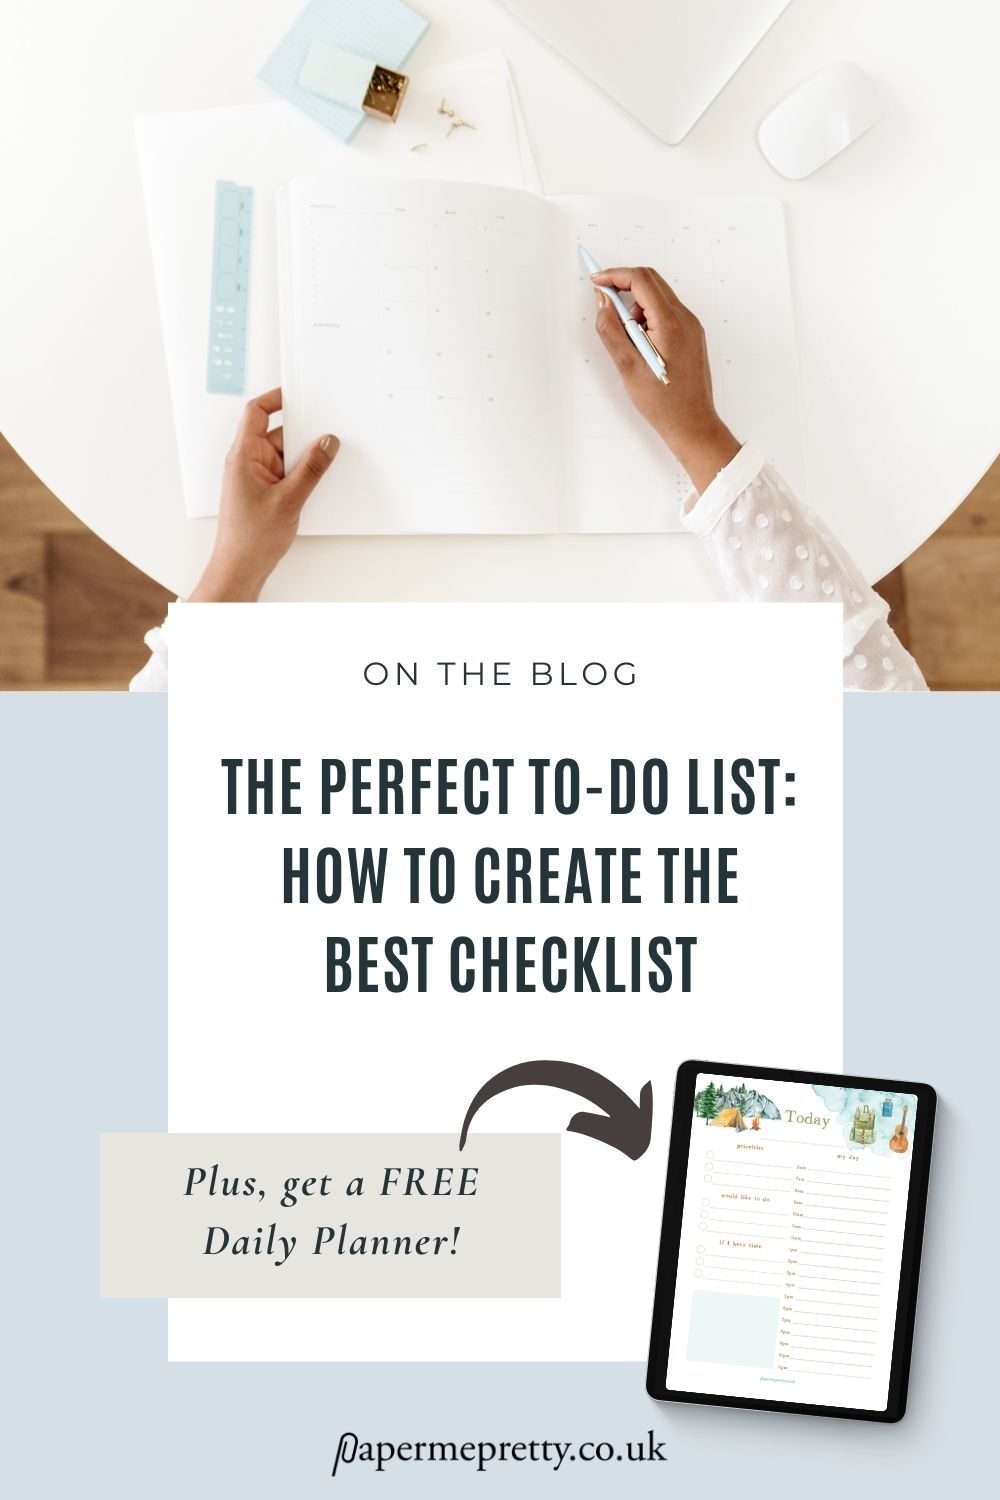 Find out why prioritising your tasks is so important and why you need to go beyond just having a numbered list. PLUS, get a FREE Daily Planner inside this post to help you accomplish your tasks and boost your productivity! #productivity #GTD #tasks #goals #stationery #timemanagement